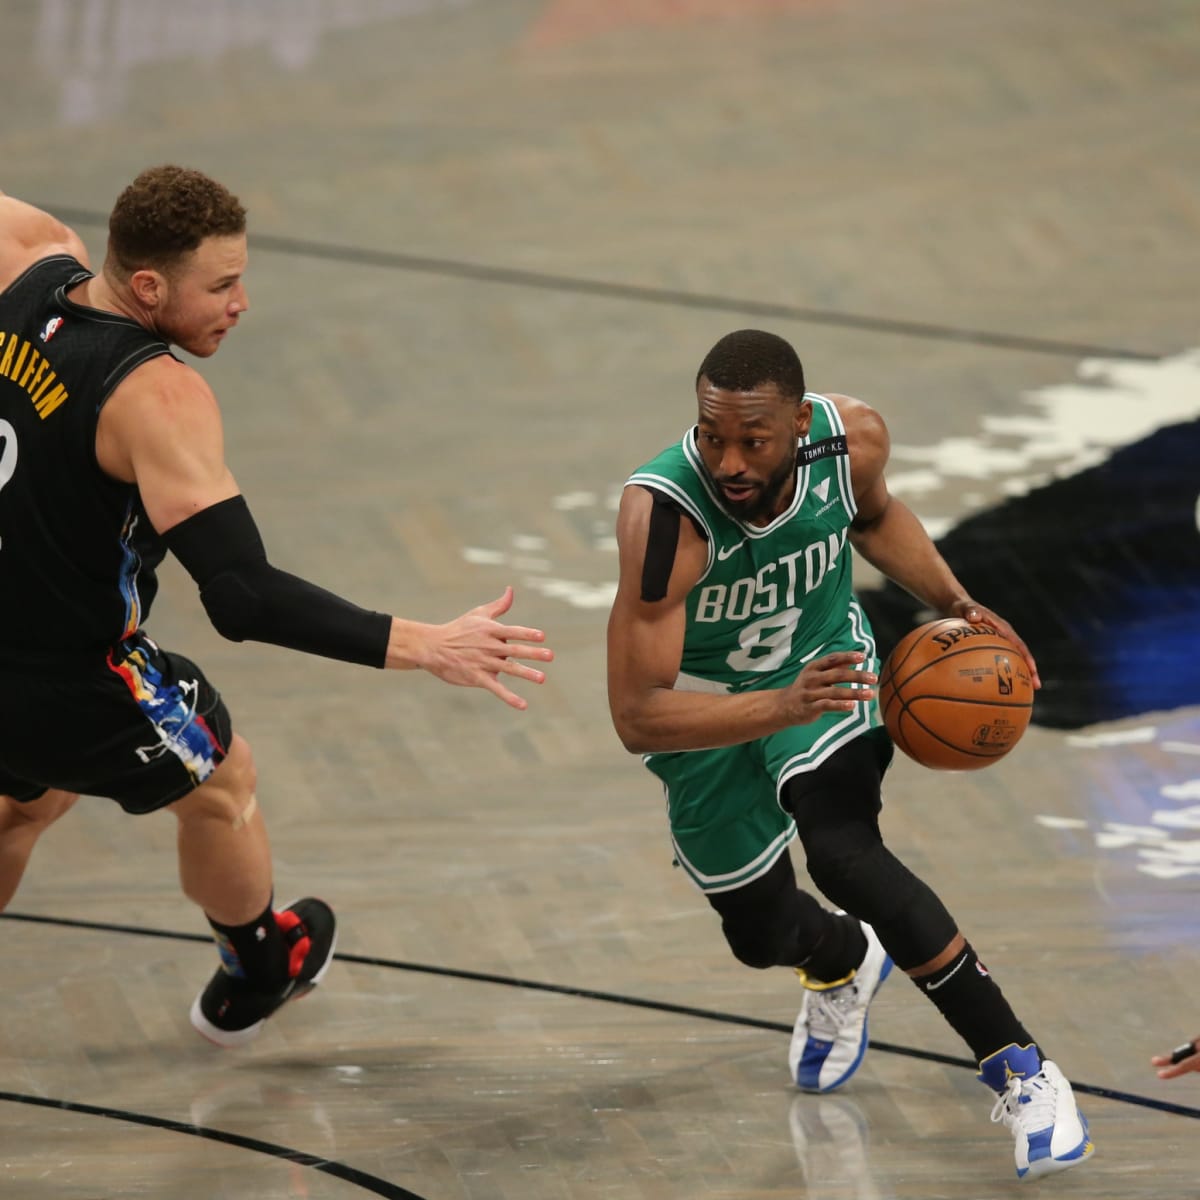 Boston Celtics: How is the team accounting for Kemba Walker's absence?